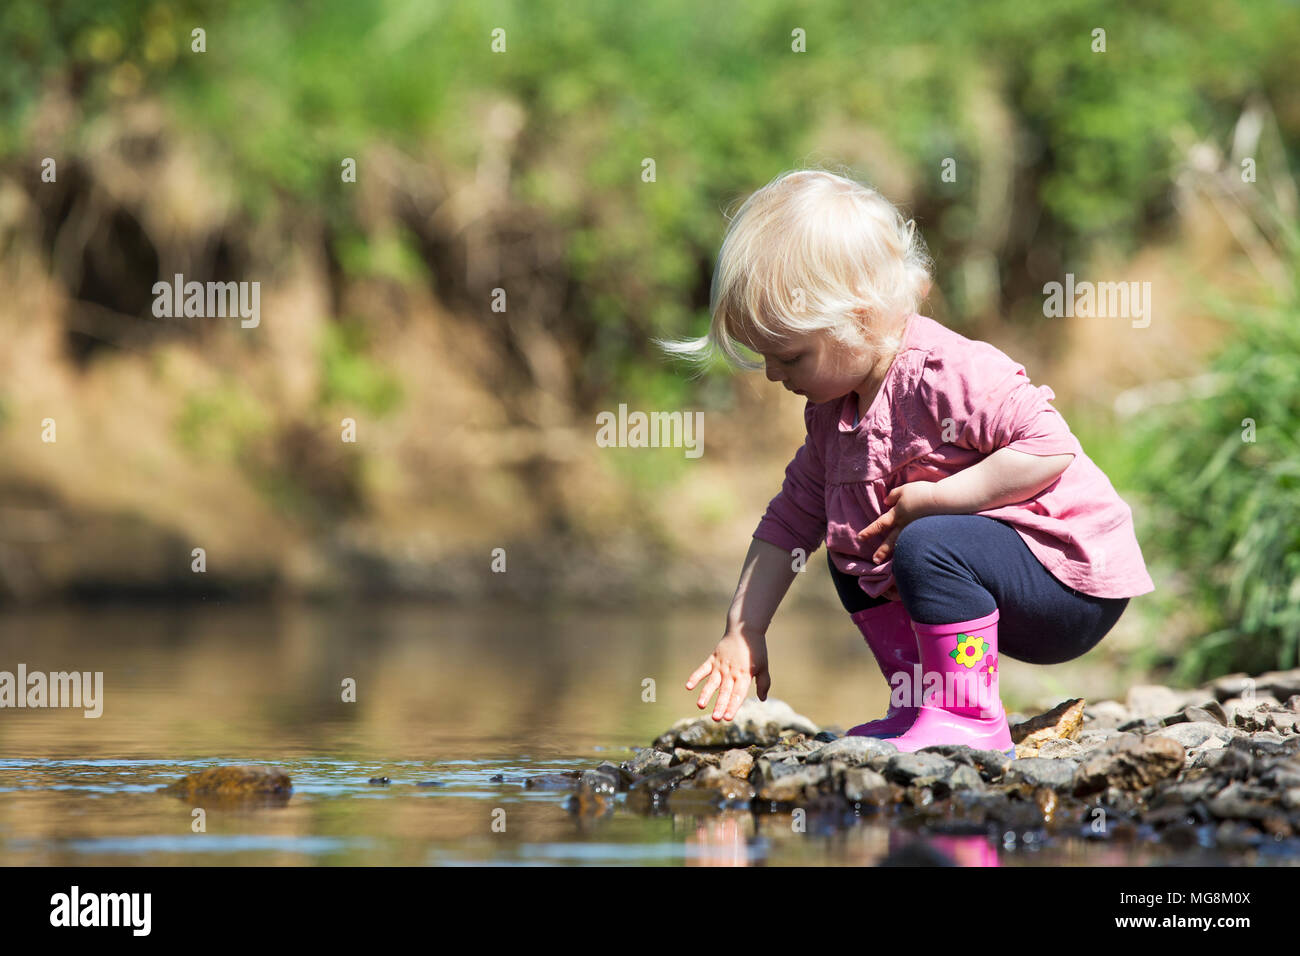 A small girrl playing in a river Stock Photo